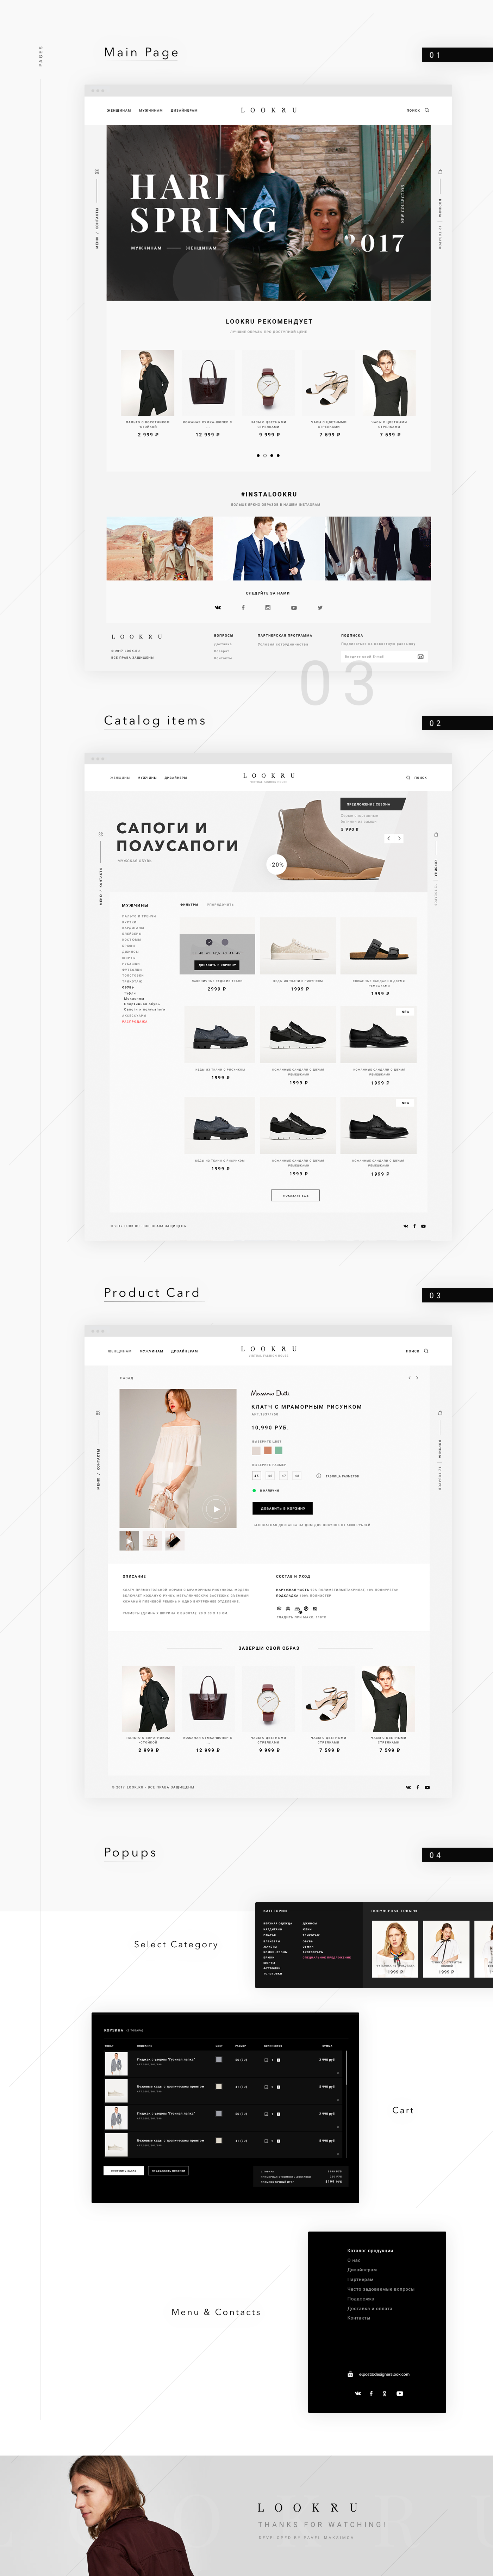 online store Ecommerce look Webdesign UI Fashion  clothes